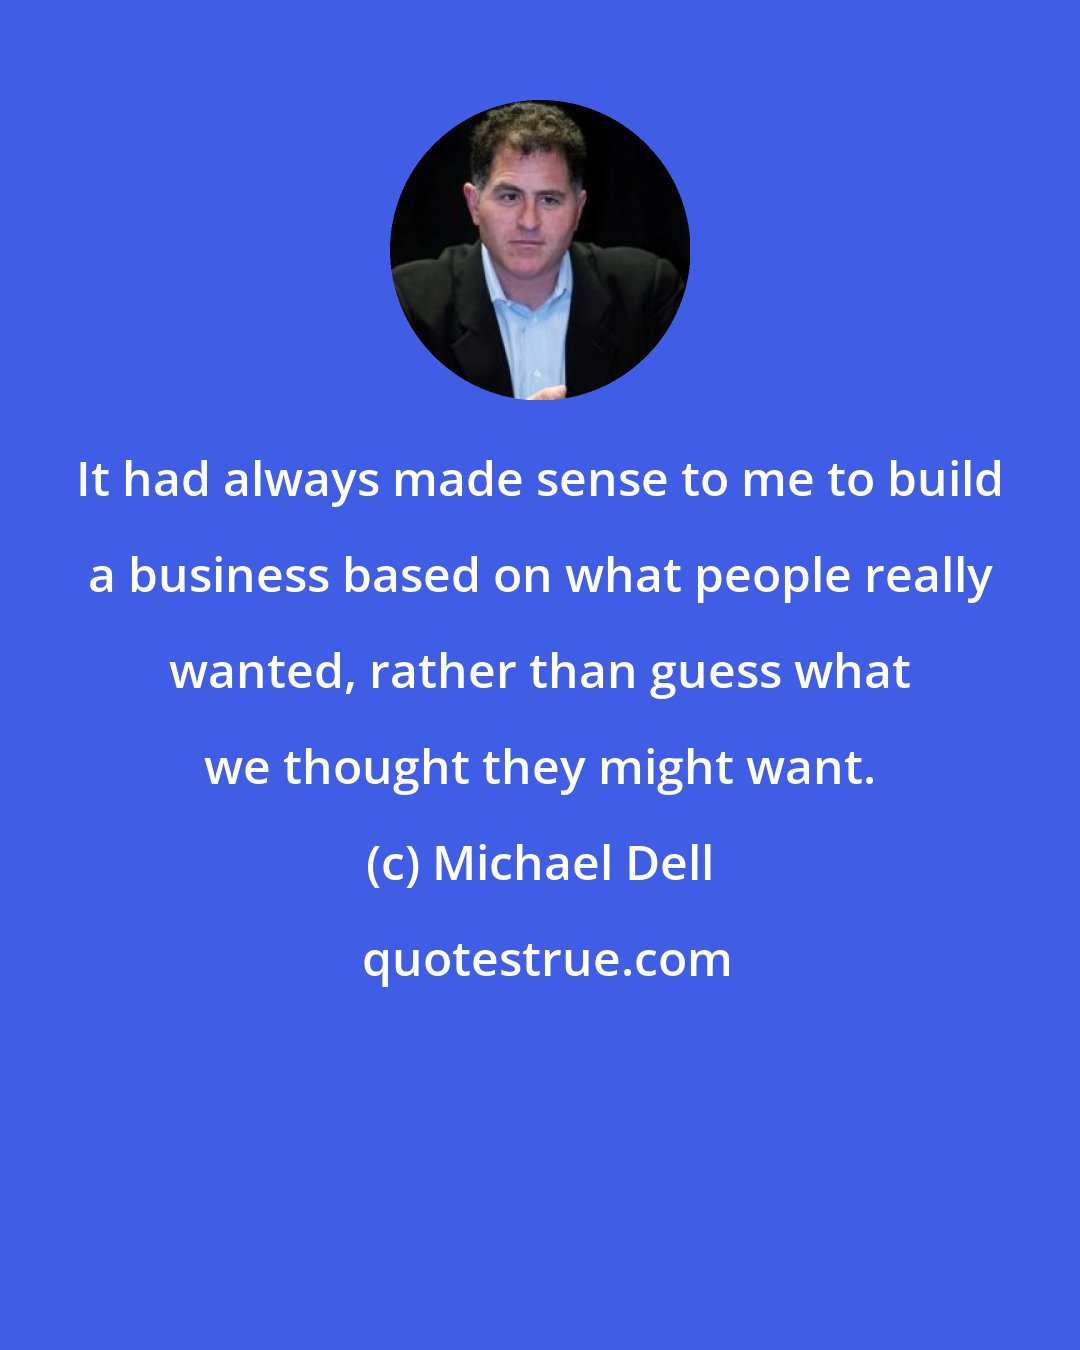 Michael Dell: It had always made sense to me to build a business based on what people really wanted, rather than guess what we thought they might want.